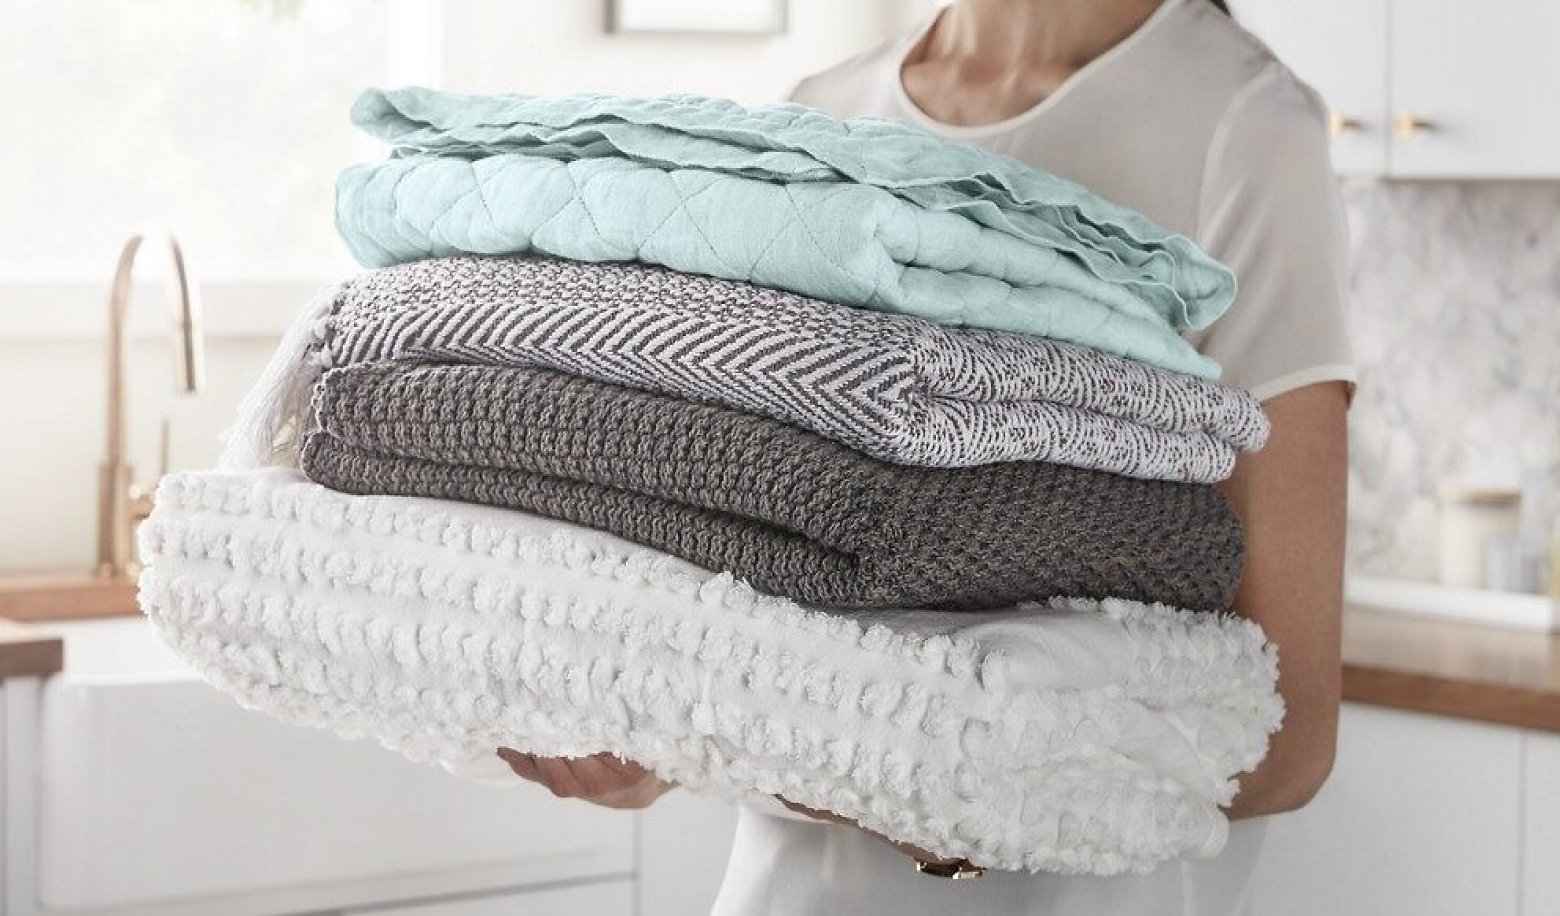 How to Separate & Sort Laundry for Washing